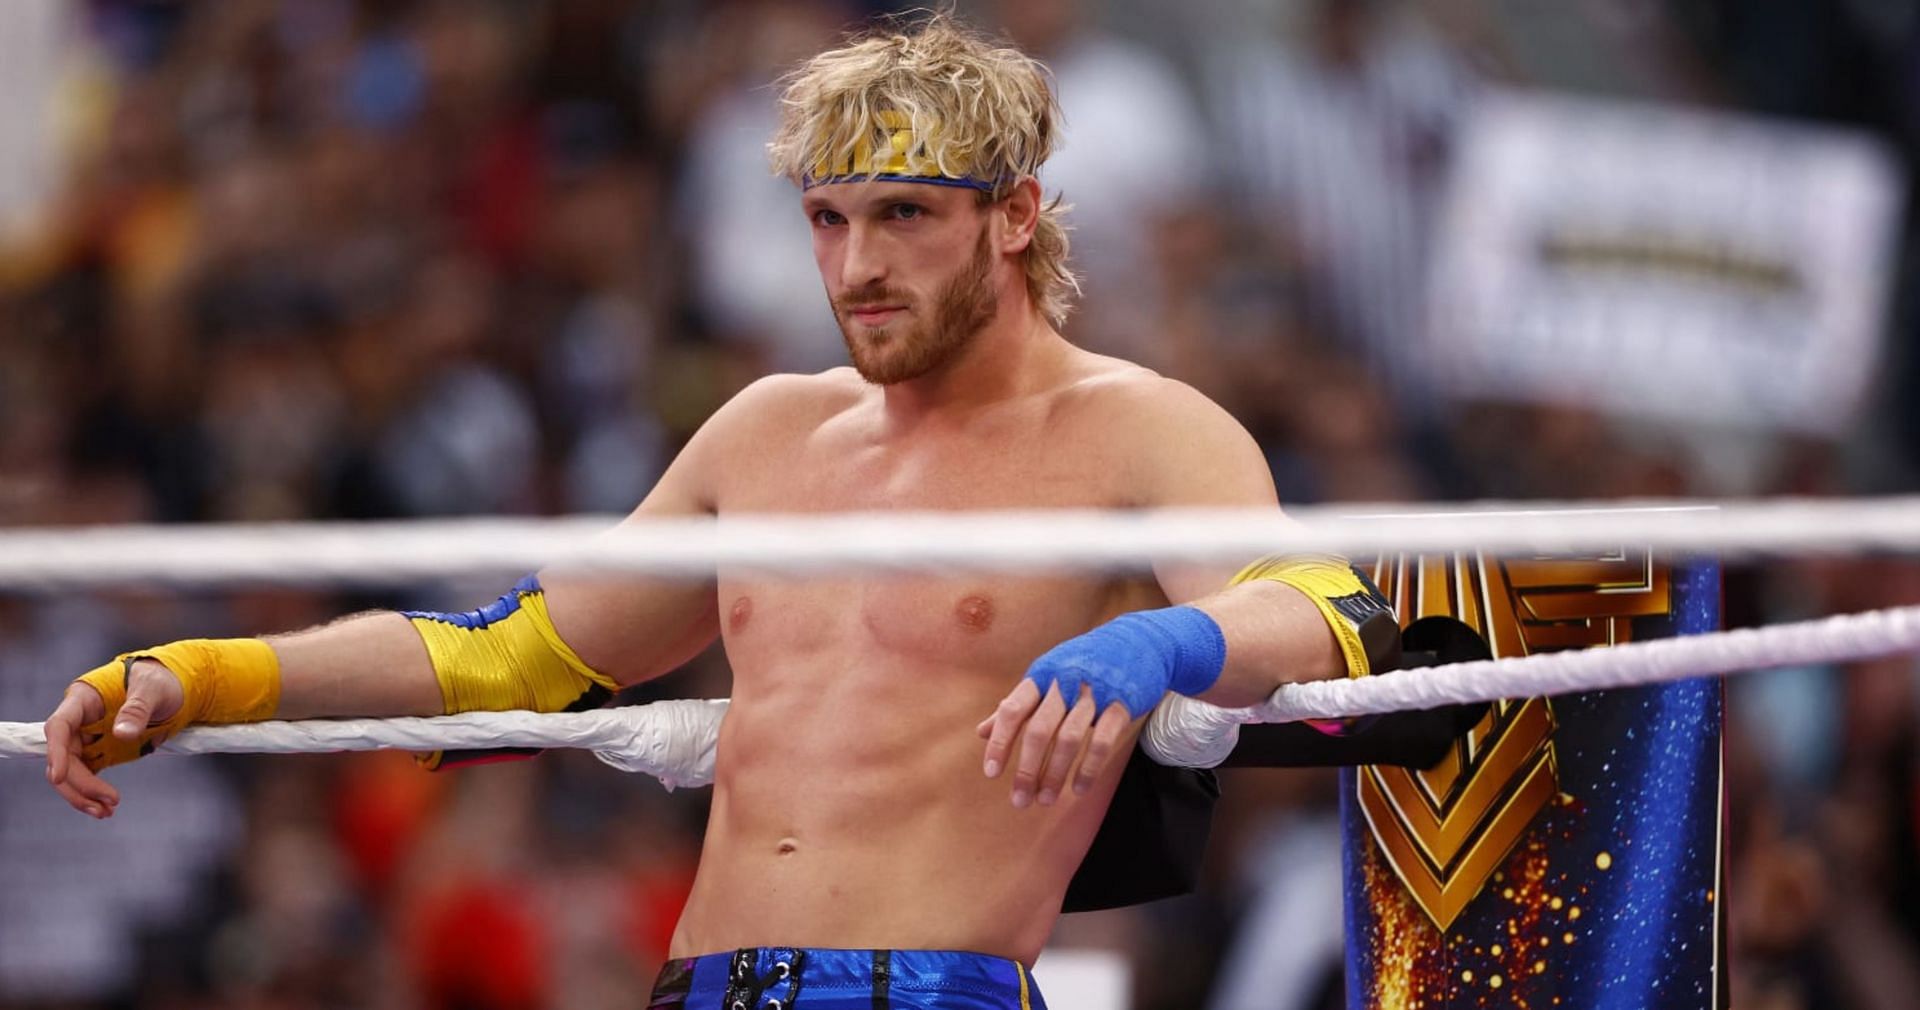 Logan Paul has wowed many with his in-ring prowess.